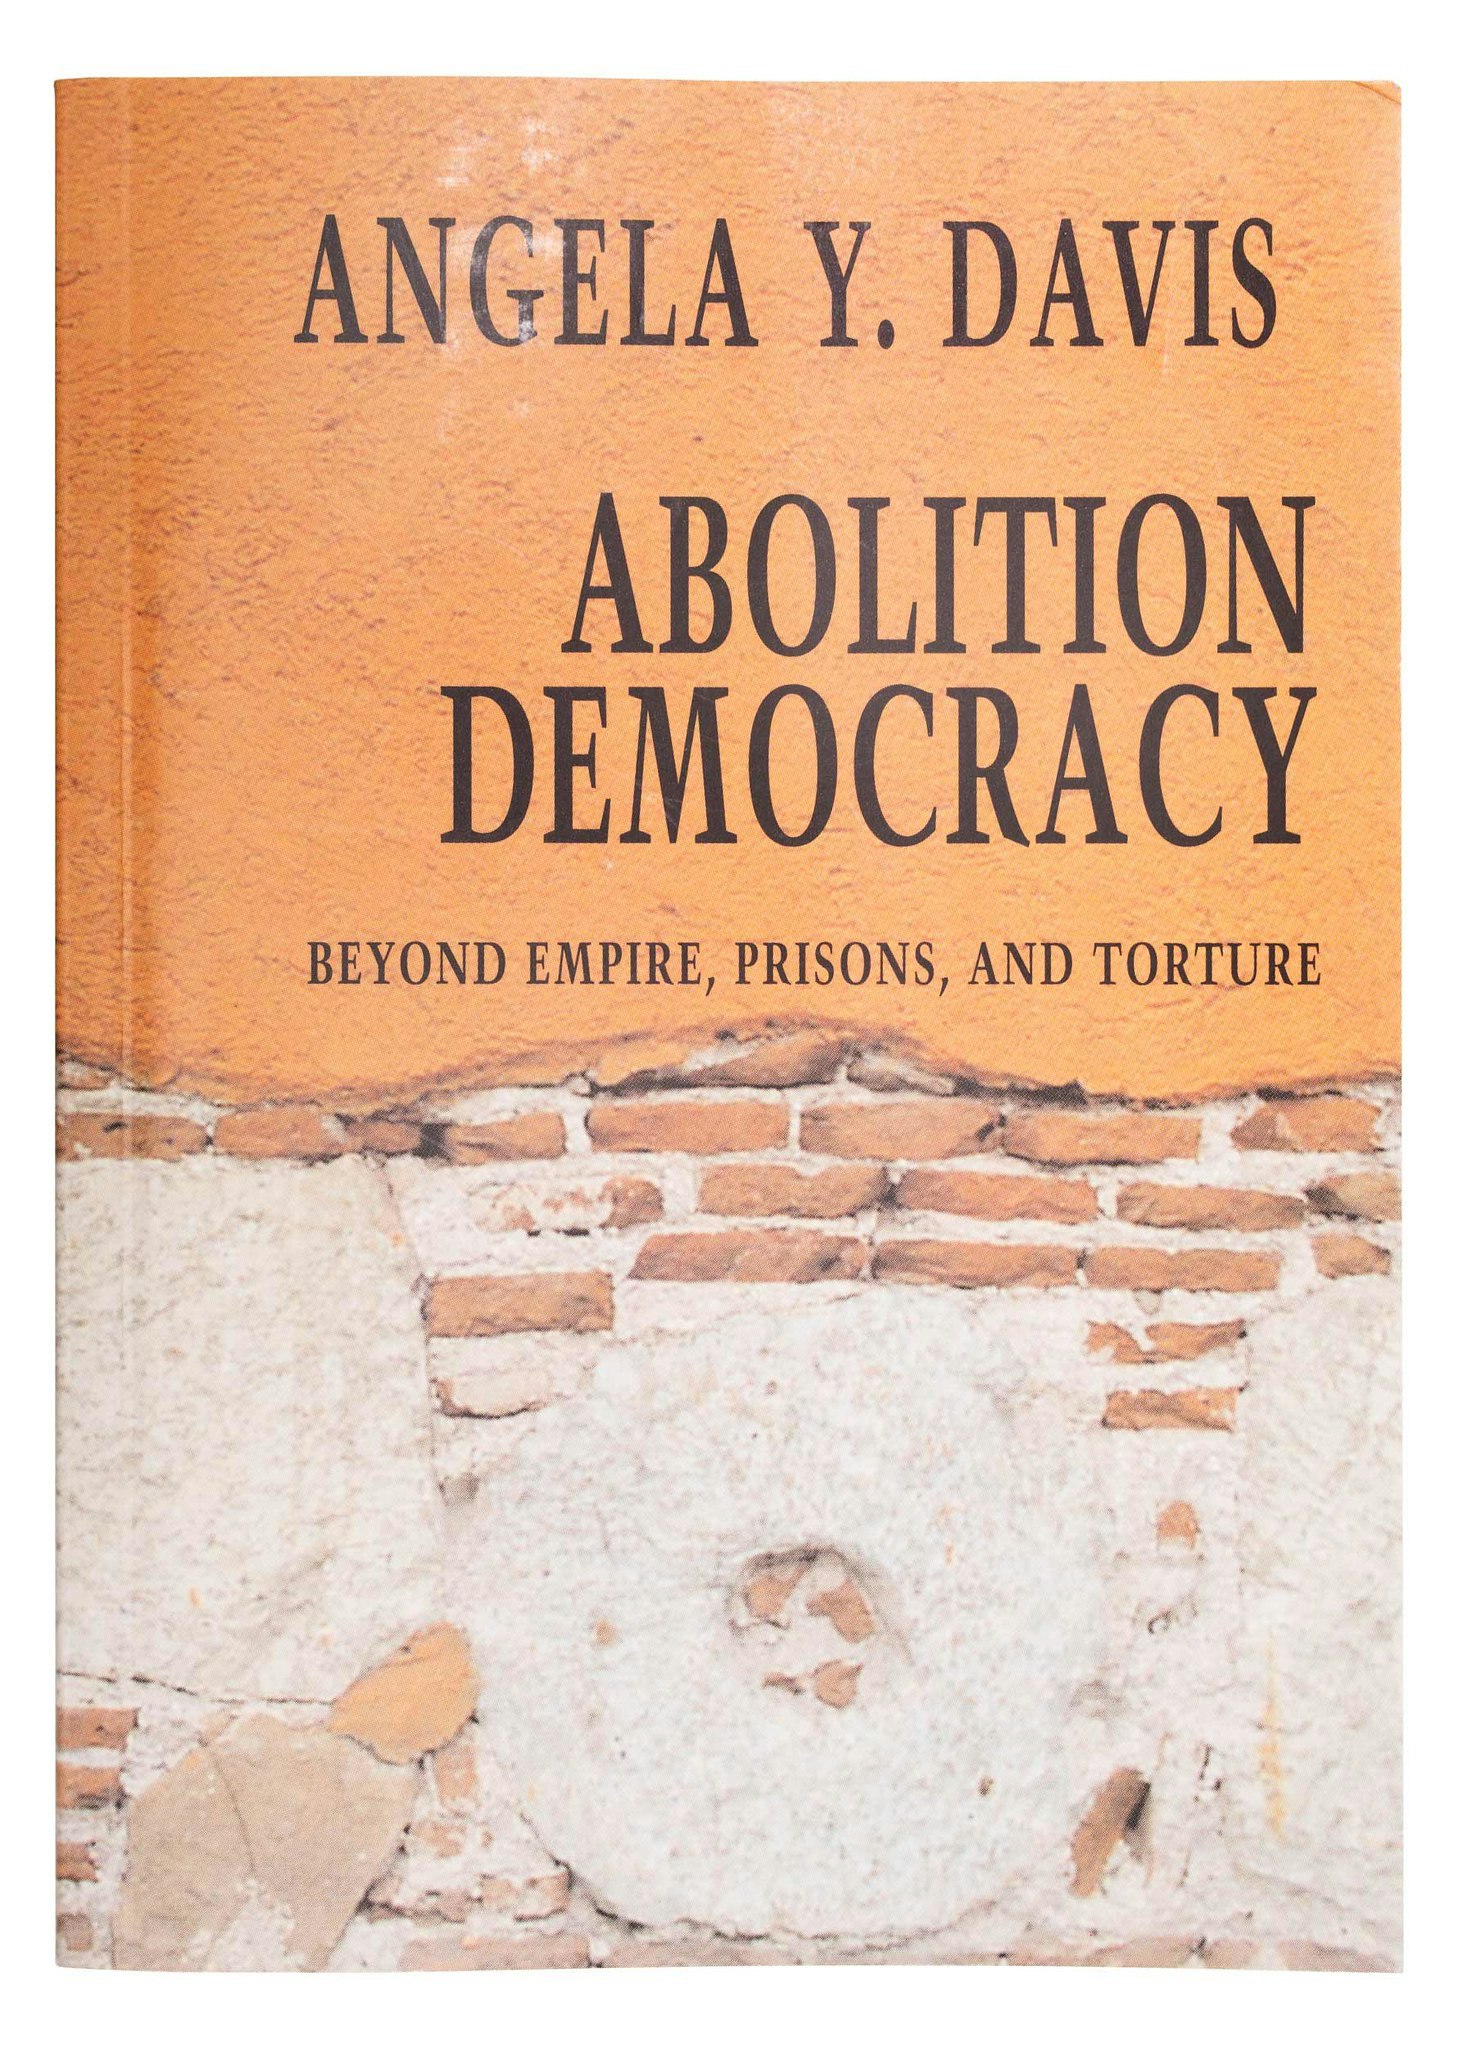 Angela Davis Bookcover, "Abolition Democracy." Bookcover illustration consists of a brick wall.